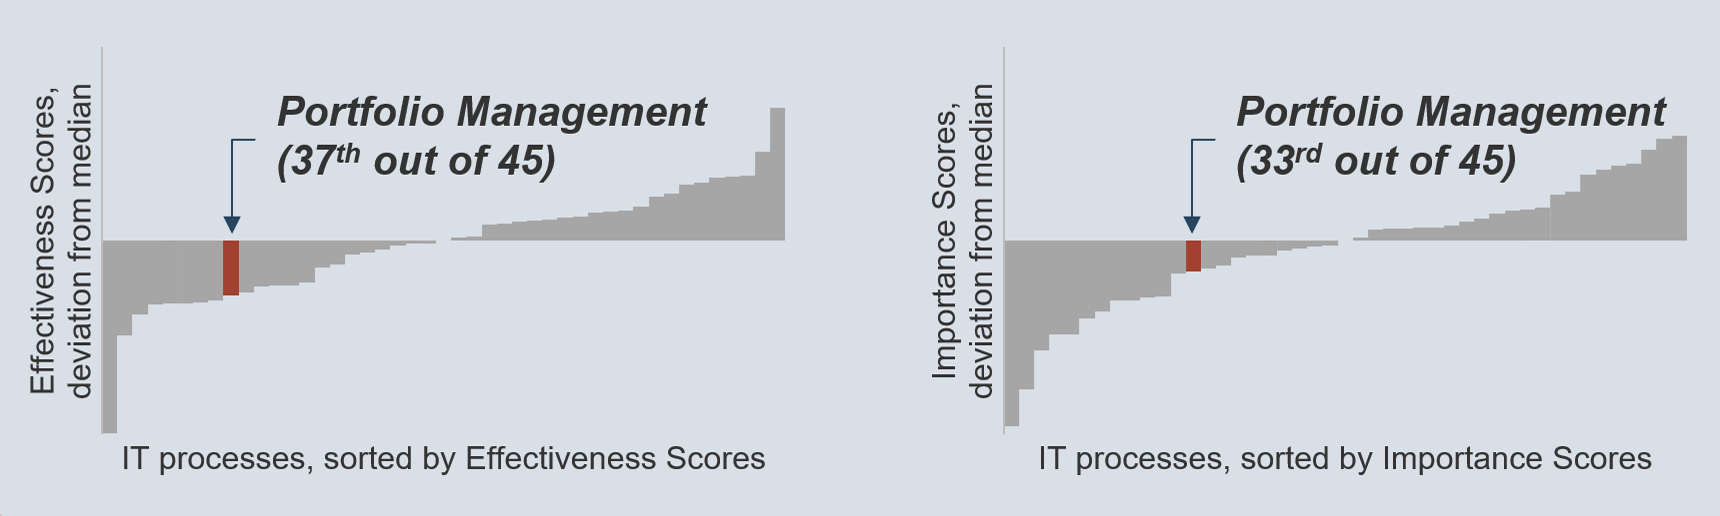 Two deviation from median charts highlighting Portfolio Management's ranking compared to other IT processes in 'Effectiveness scores' and 'Importance scores'. PPM ranks 37th out of 45 in Effectiveness and 33rd out of 45 in Importance.